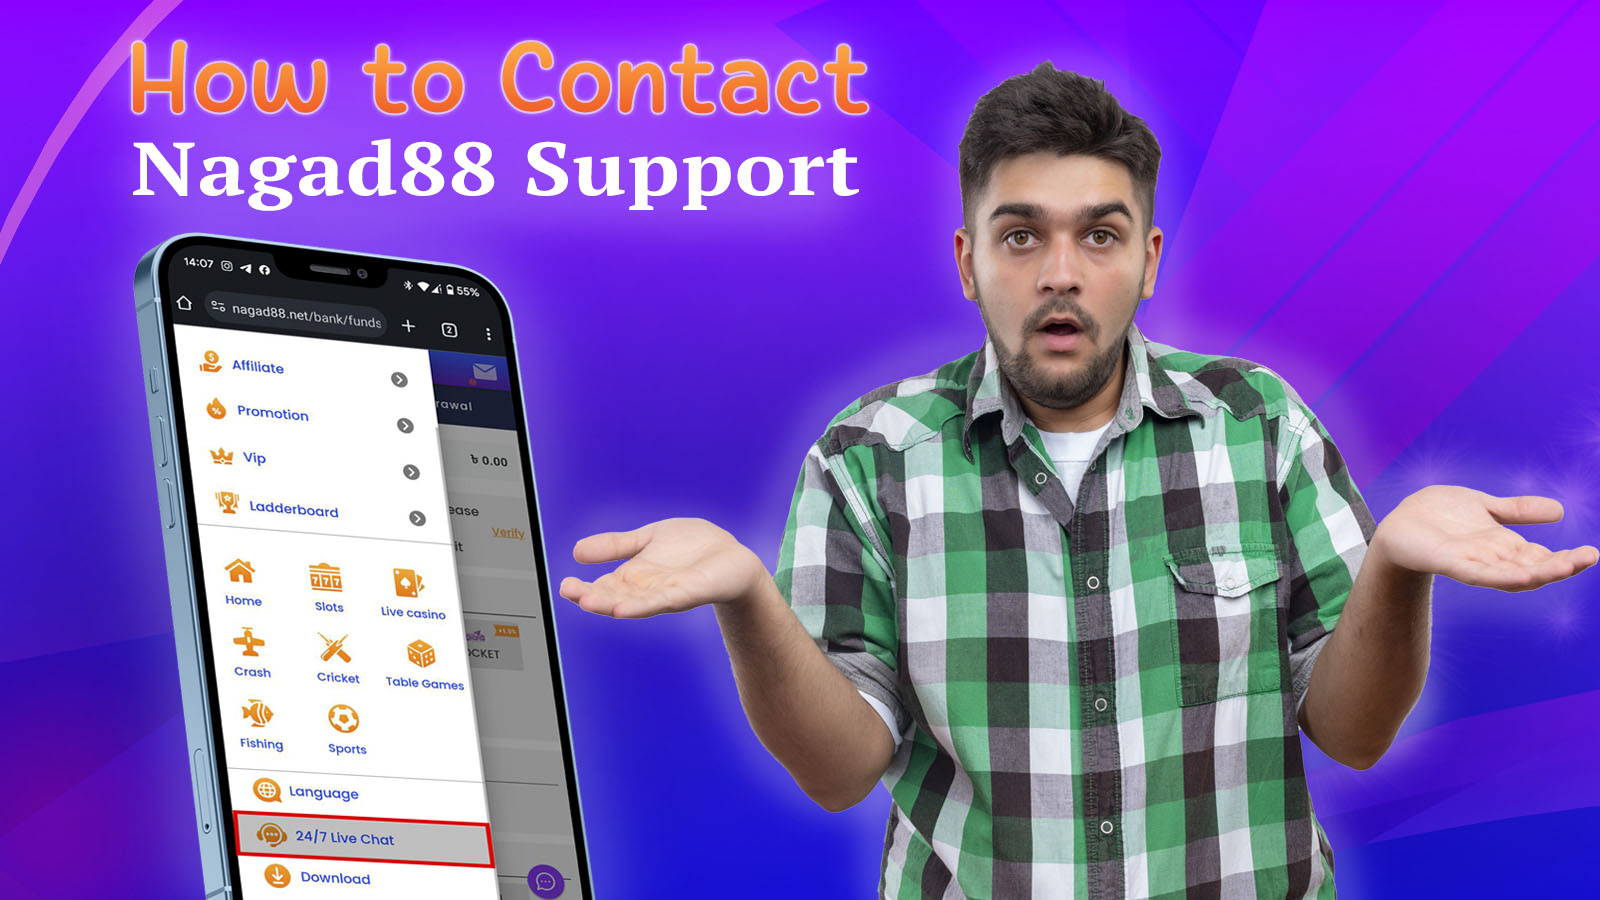 Simple and convenient way to contact support